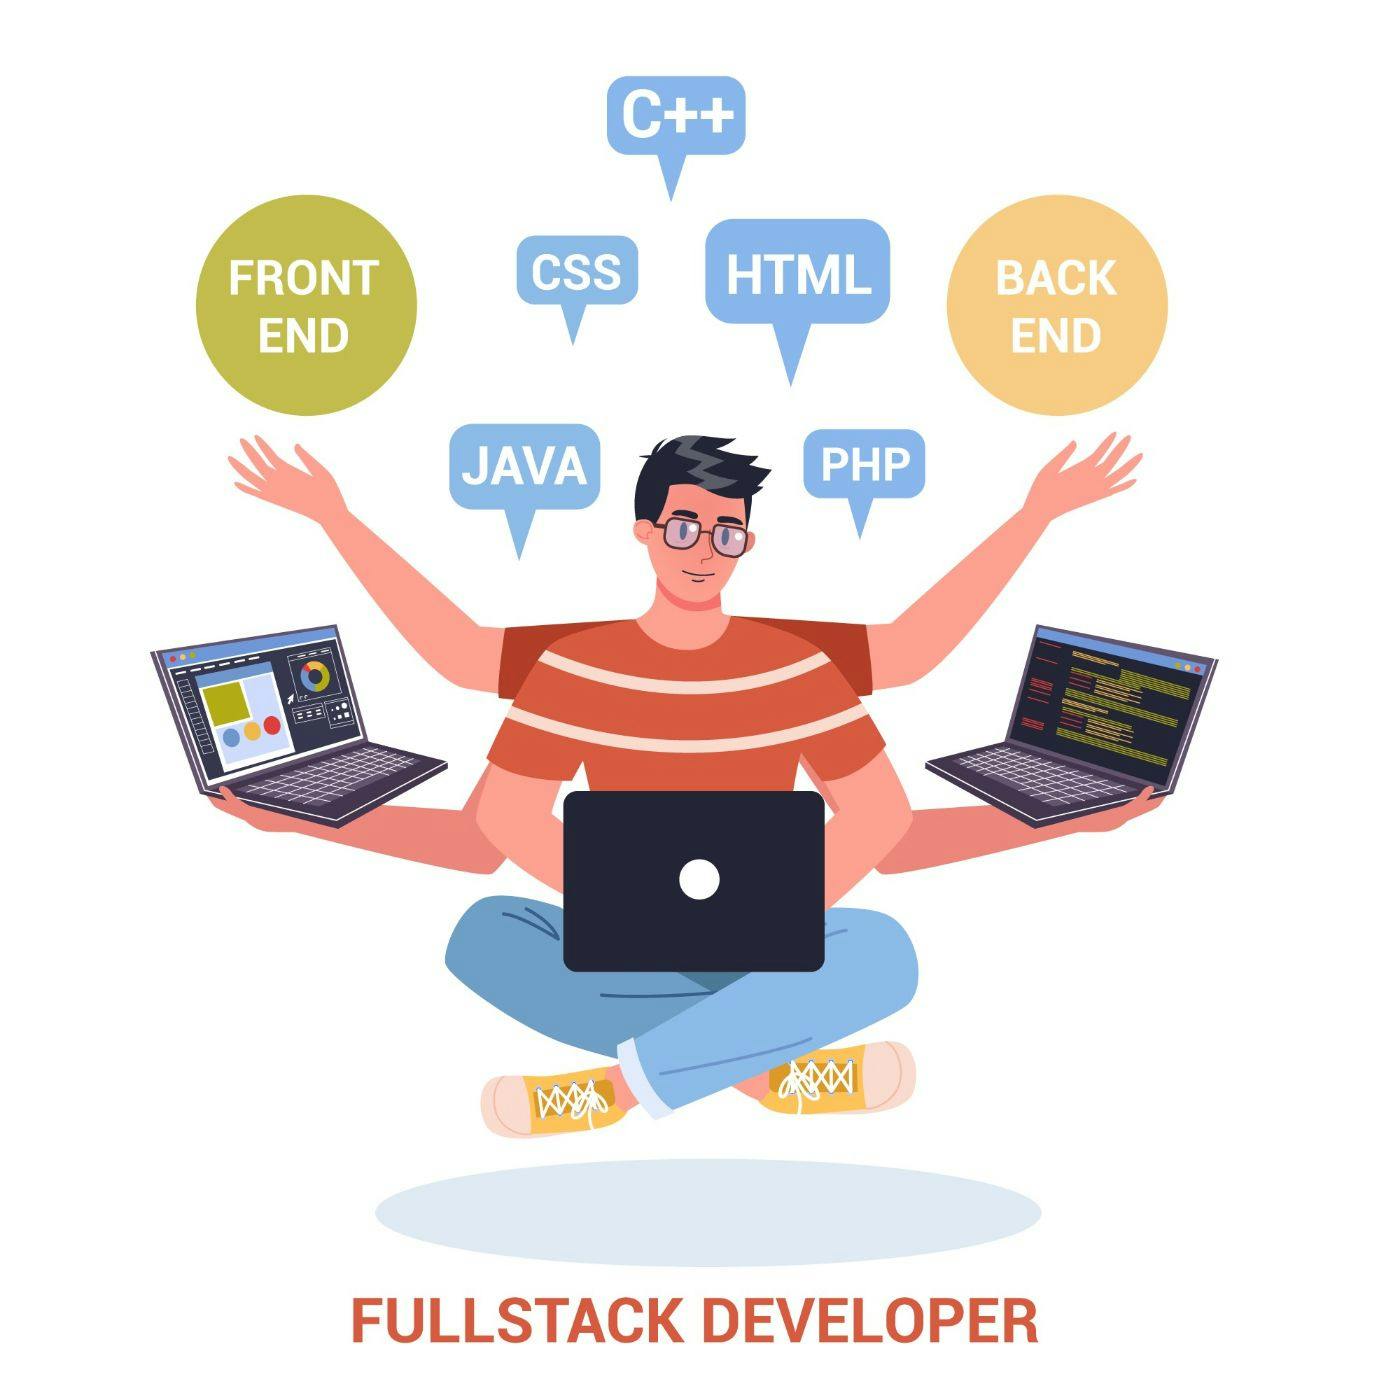 /why-should-you-hire-full-stack-developers-for-your-project feature image